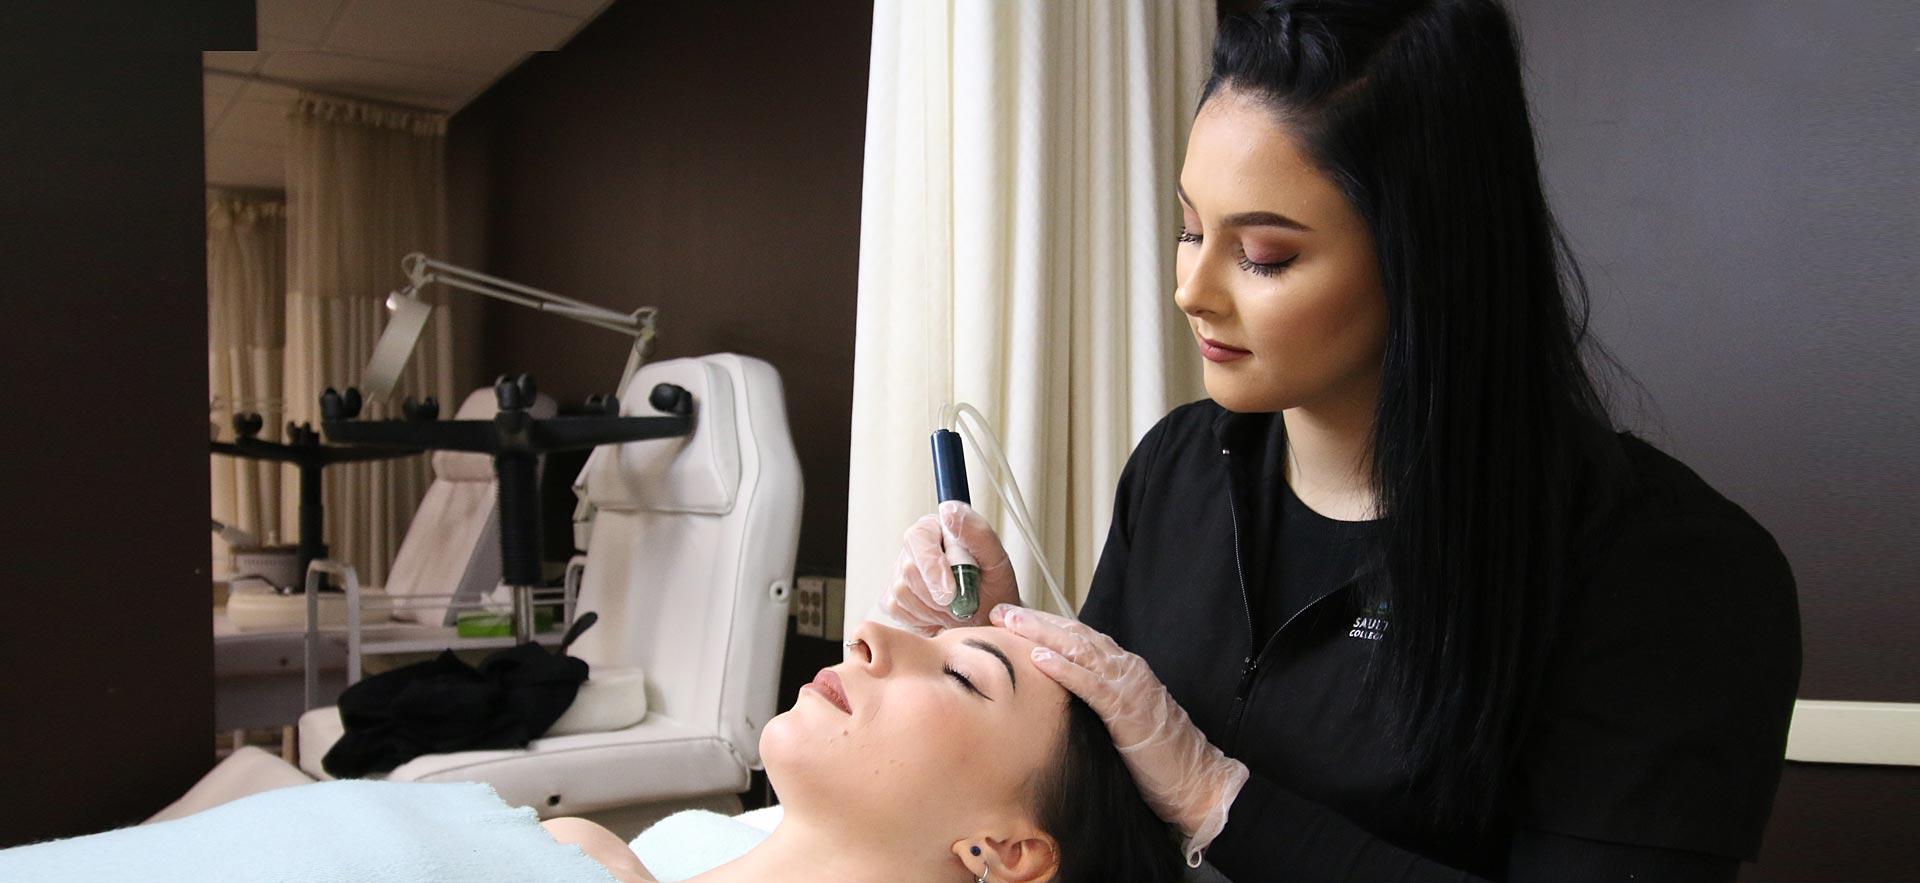 One female Esthetician student applies a skin treatment to another student in the ӣƵ salon spa.